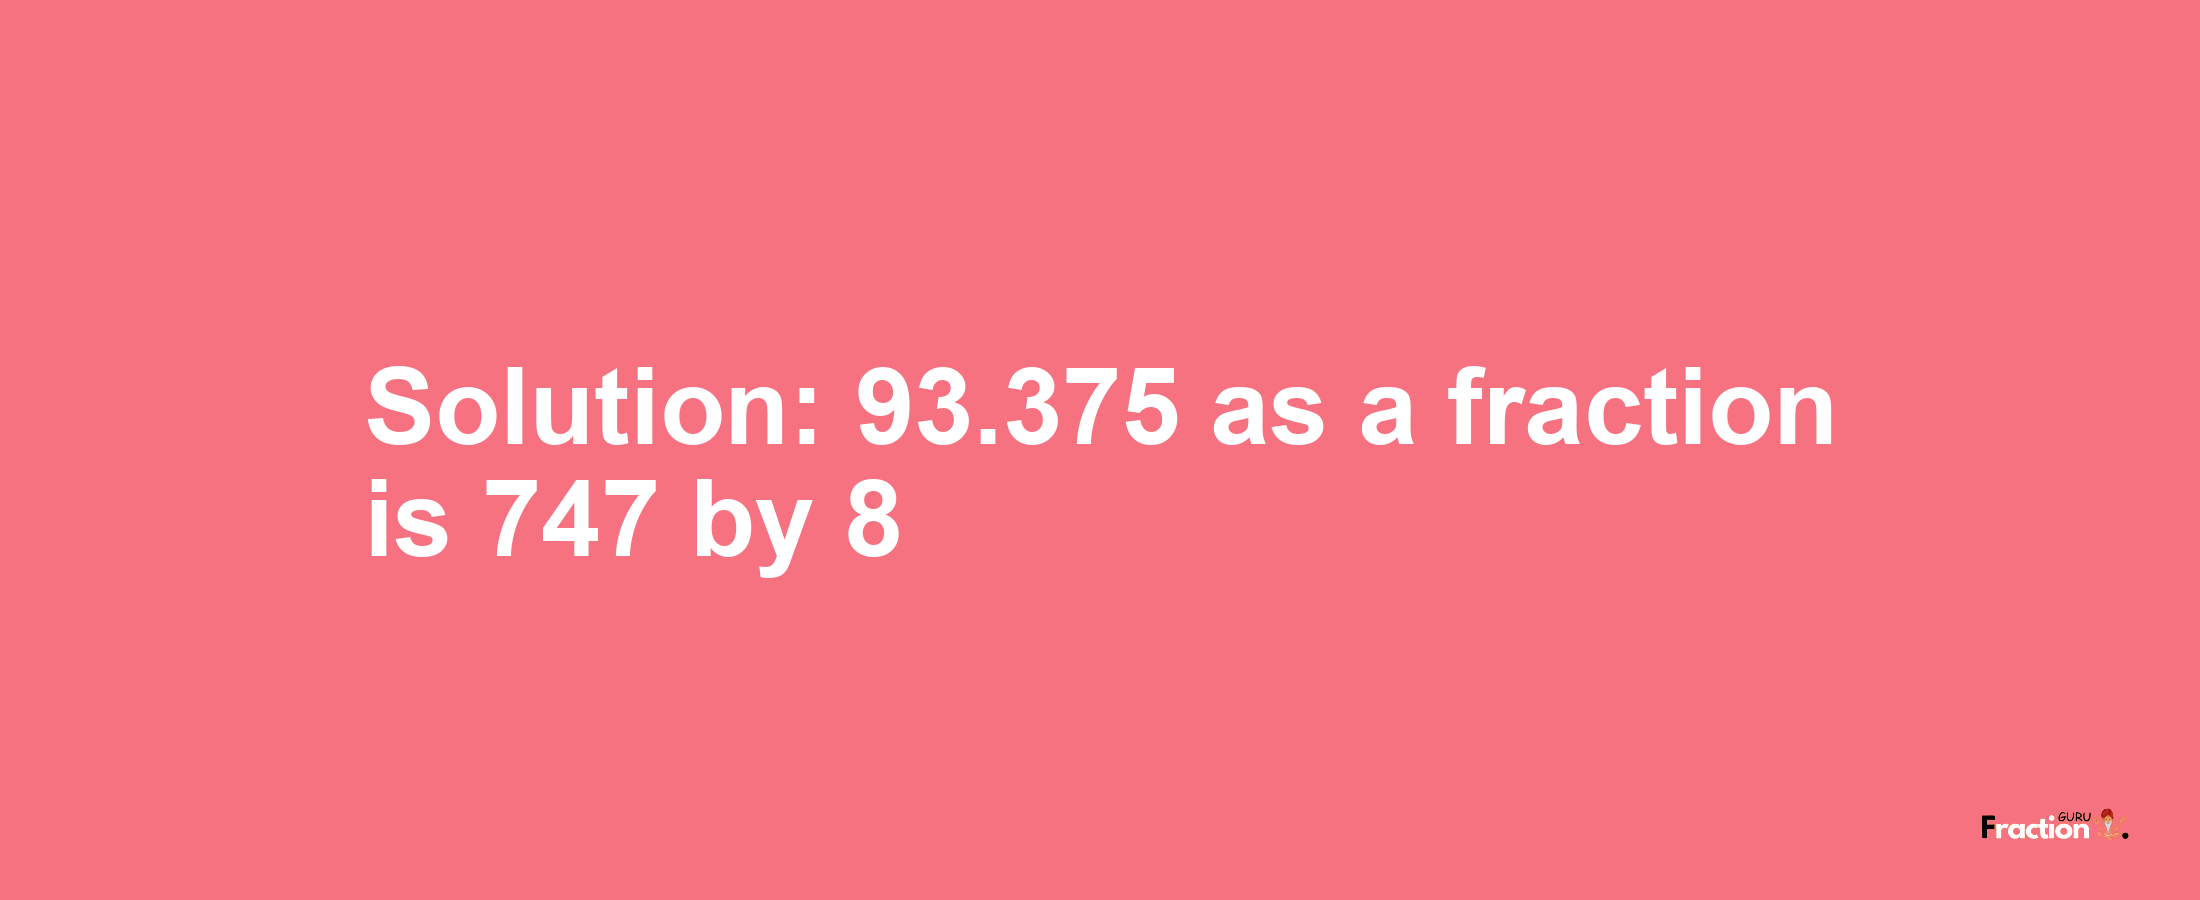 Solution:93.375 as a fraction is 747/8